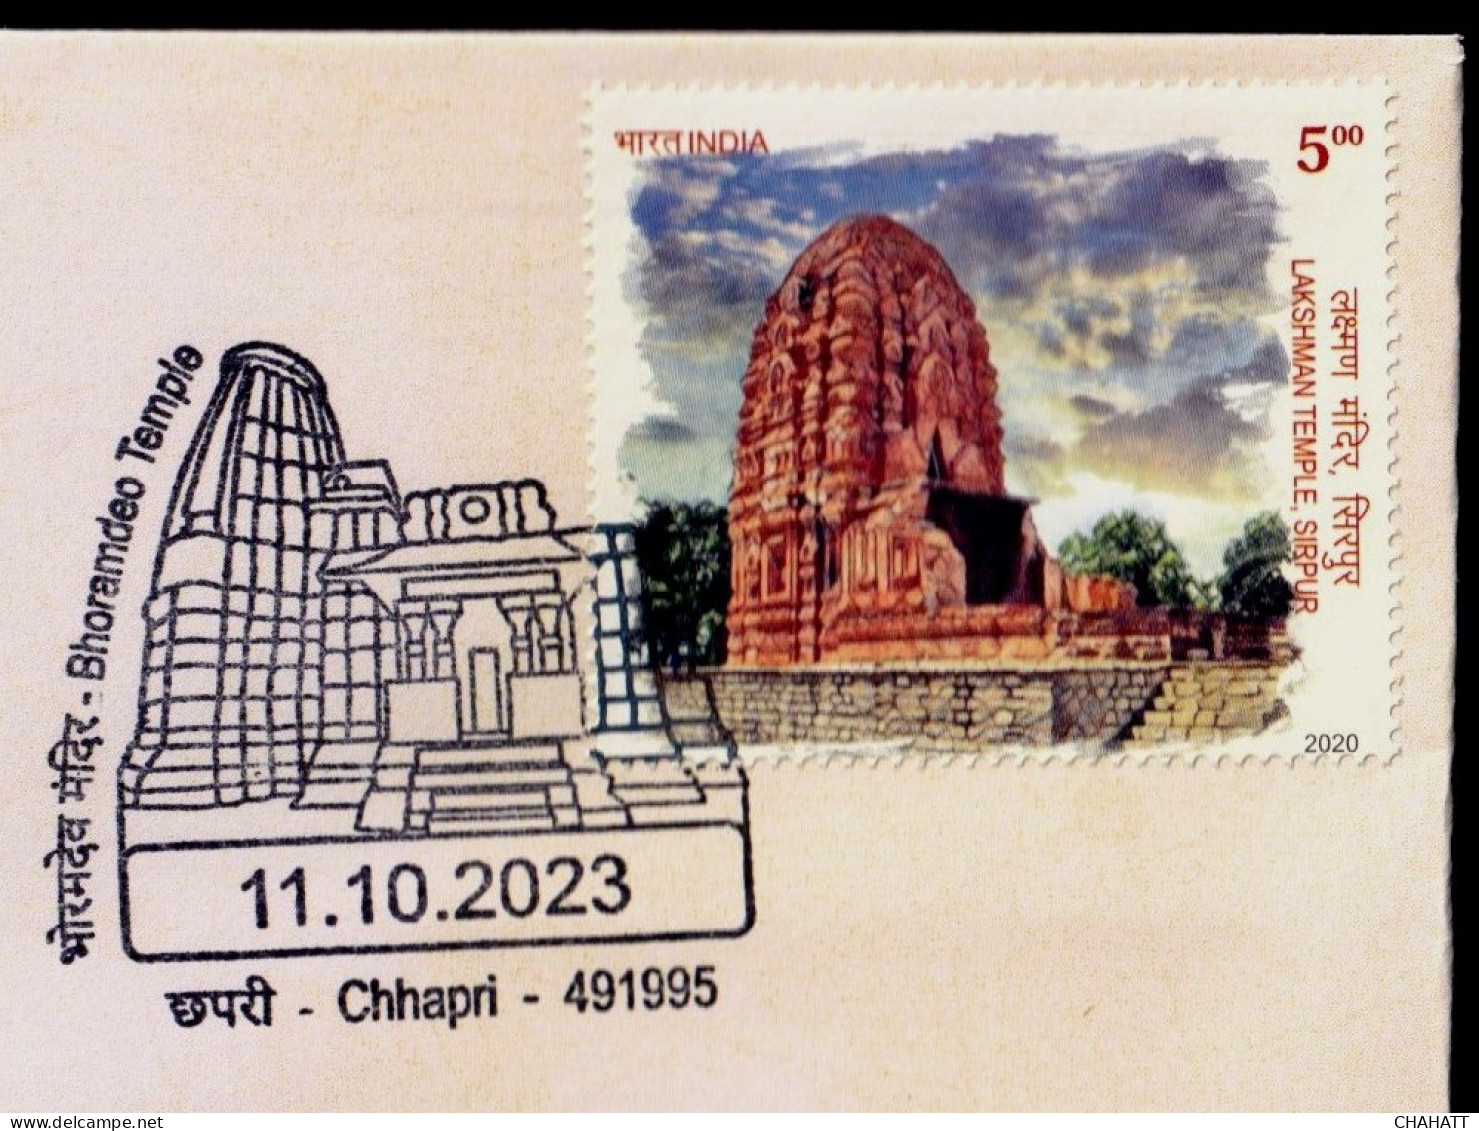 HINDUISM- BHORAMDEO TEMPLE- PERMANENT CACHET- INDIA POST, RAIPUR GPO-CG CIRCLE-LIMITED ISSUE-BX4-29 - Induismo